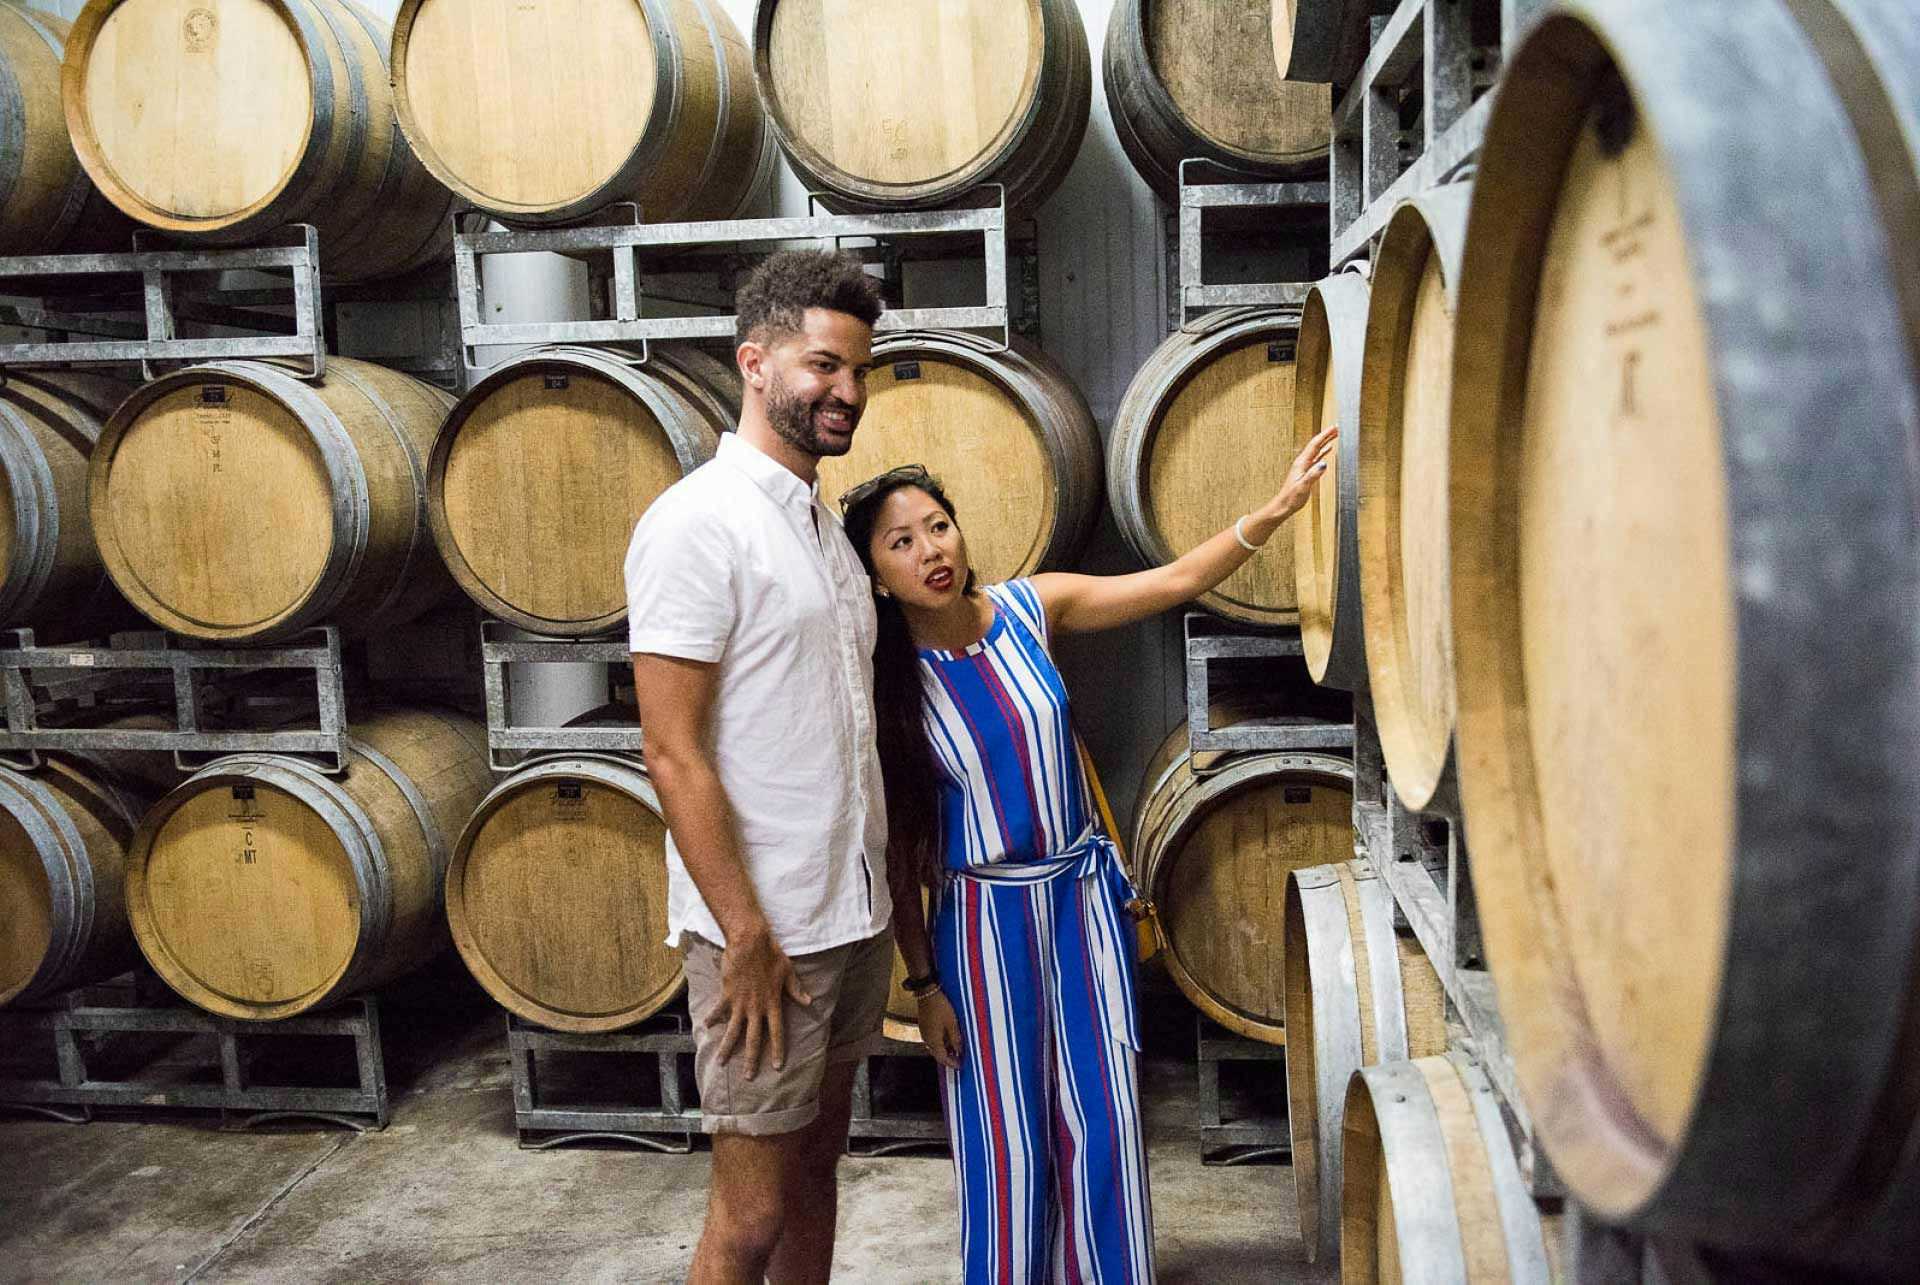 Couple looking at barrels in a wine cellar